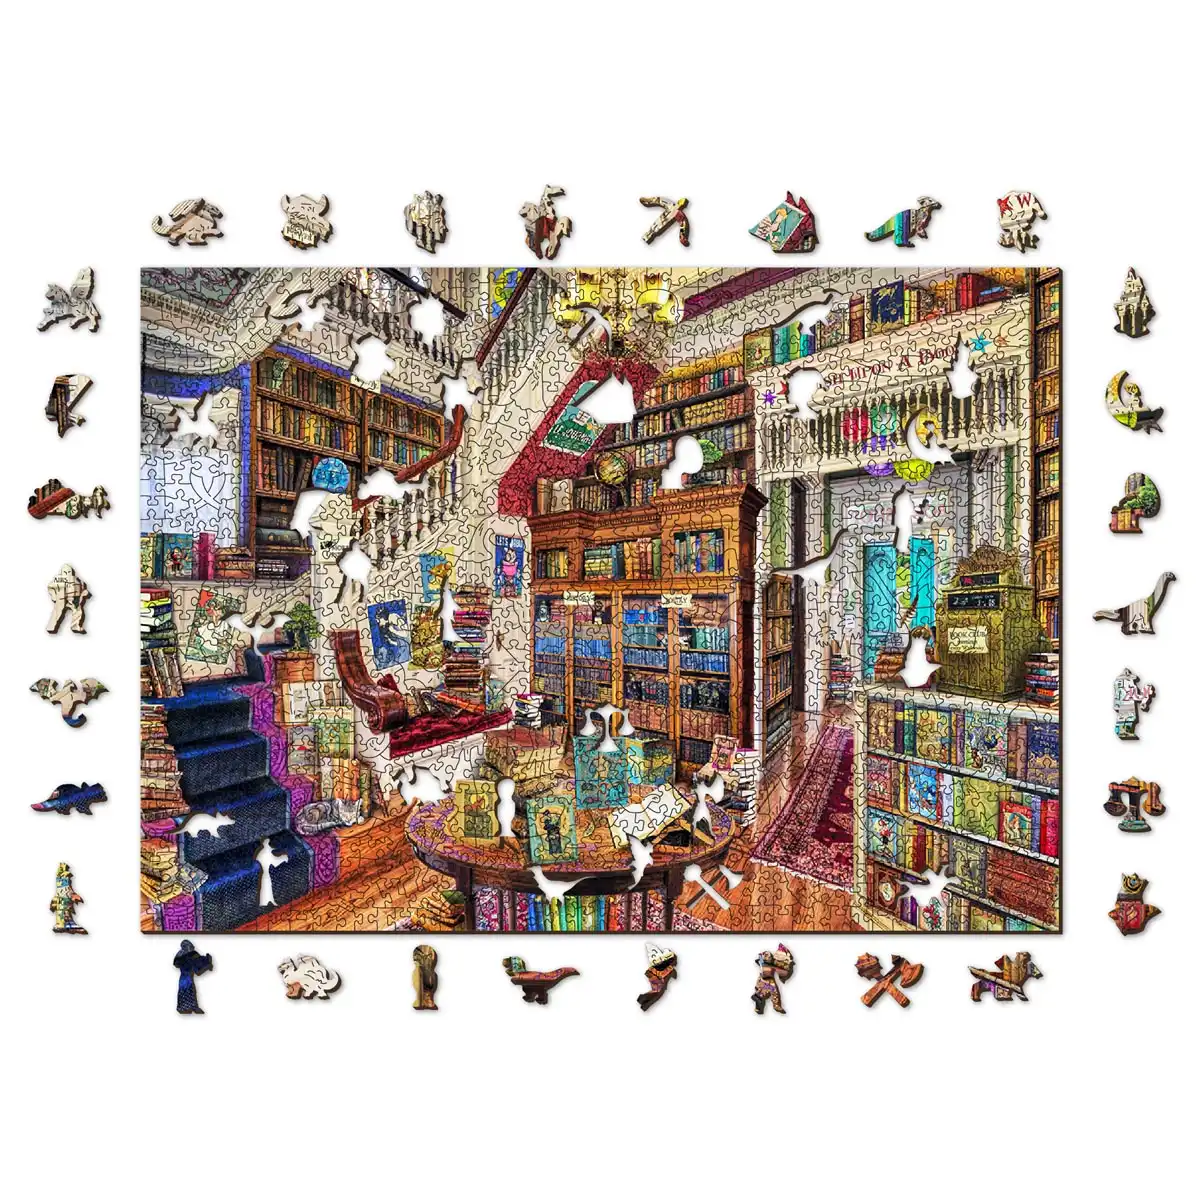 Turani Wooden 1000 Piece Puzzles for Adults 1000 Piece Jigsaw Puzzles 1000  Pieces for Adults Jigsaw Puzzle Series Puzzles 1000 Piece Puzzle(Wooden